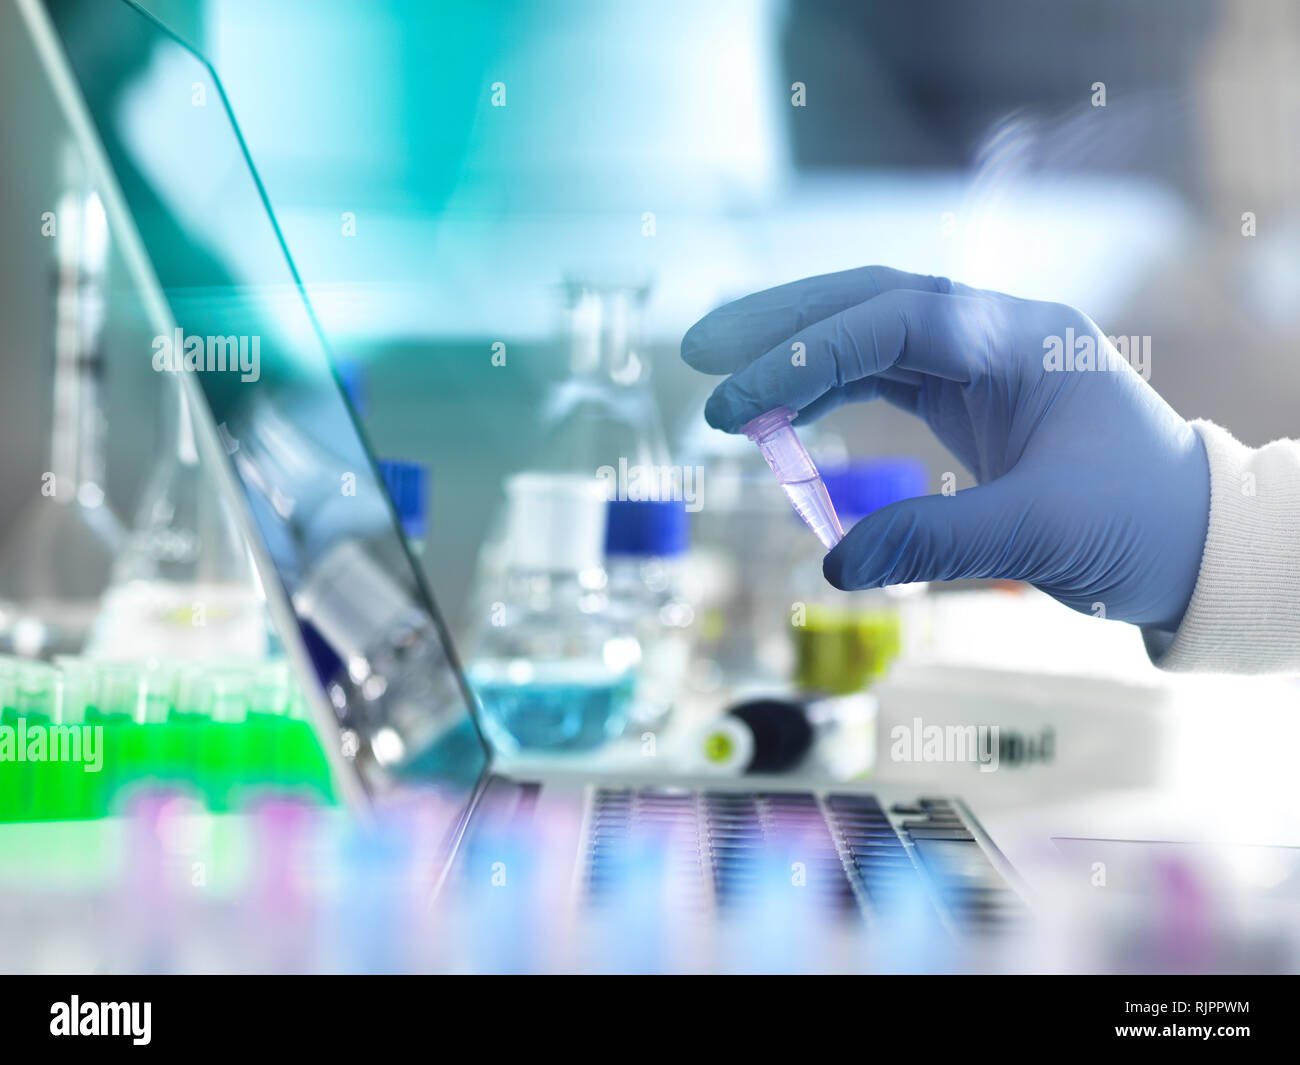 Scientist examining vial containing sample used in biomedical, DNA, biotechnology, analytical chemistry, pharmaceutical research Stock Photo